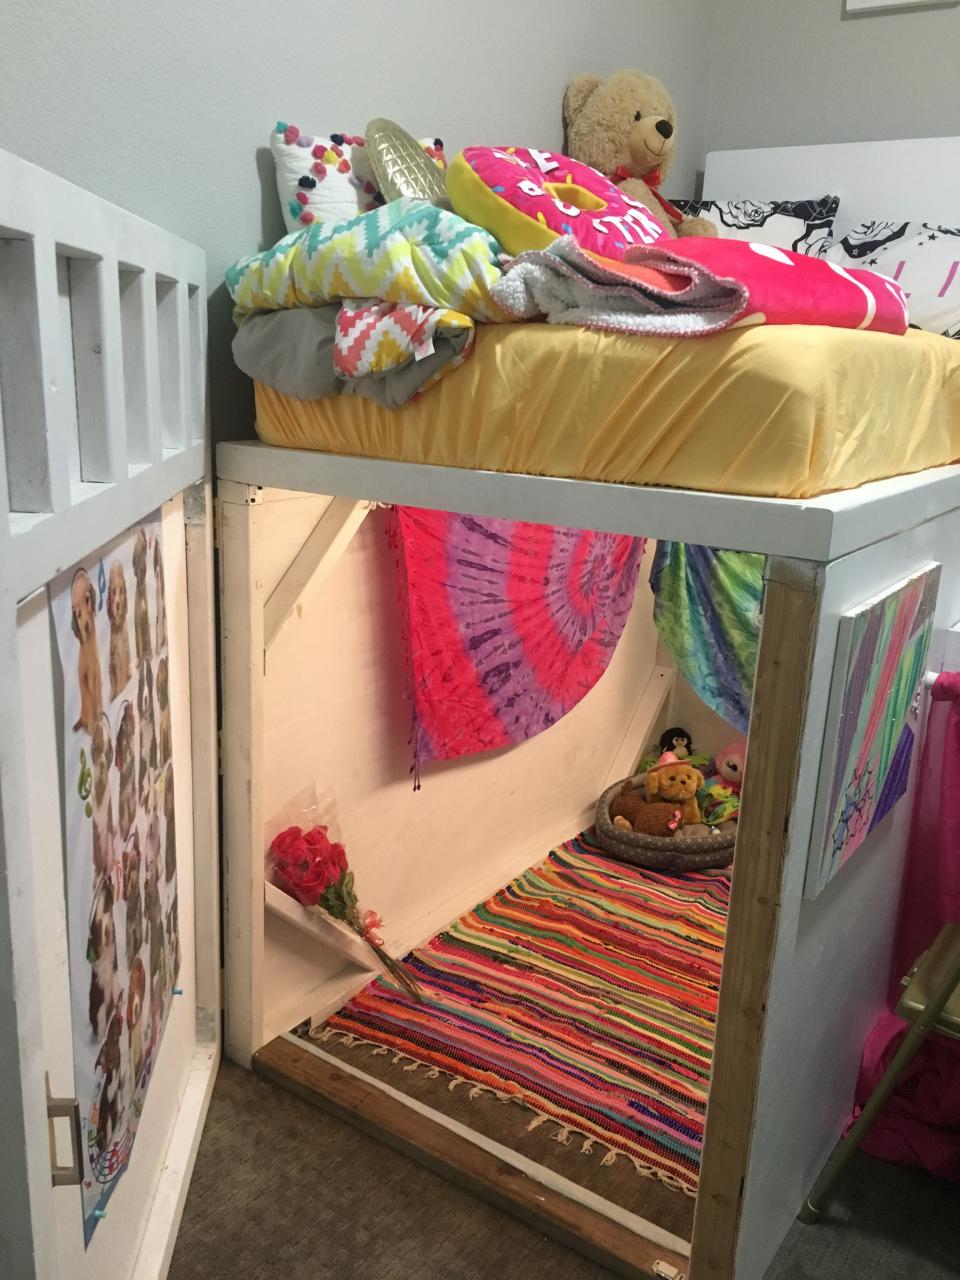 a bunk bed with colorful blankets and pillows on it's bottom shelf next